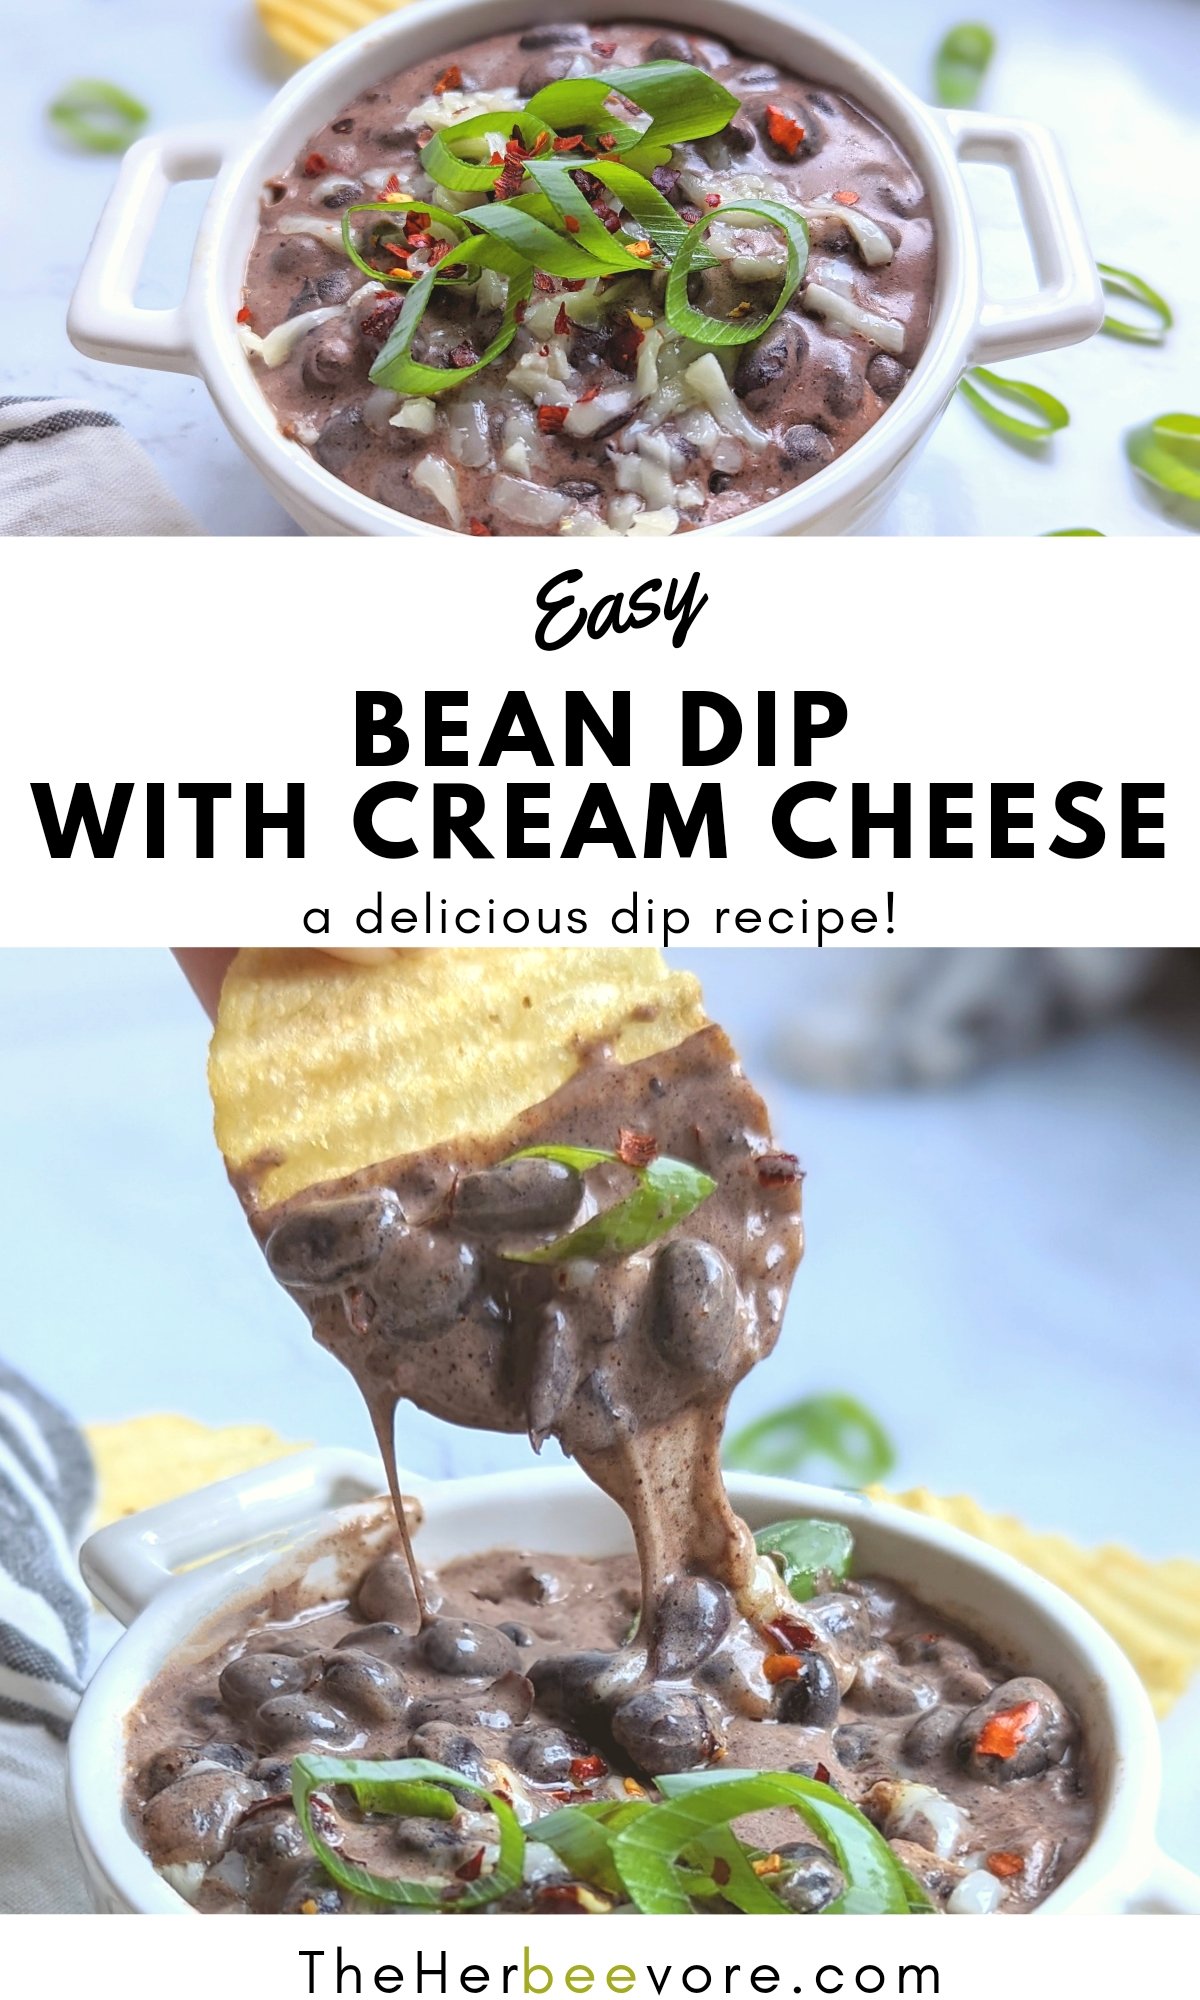 bean dip with cream cheese recipe holiday dip and appetizers midwestern recipes mexican american dips